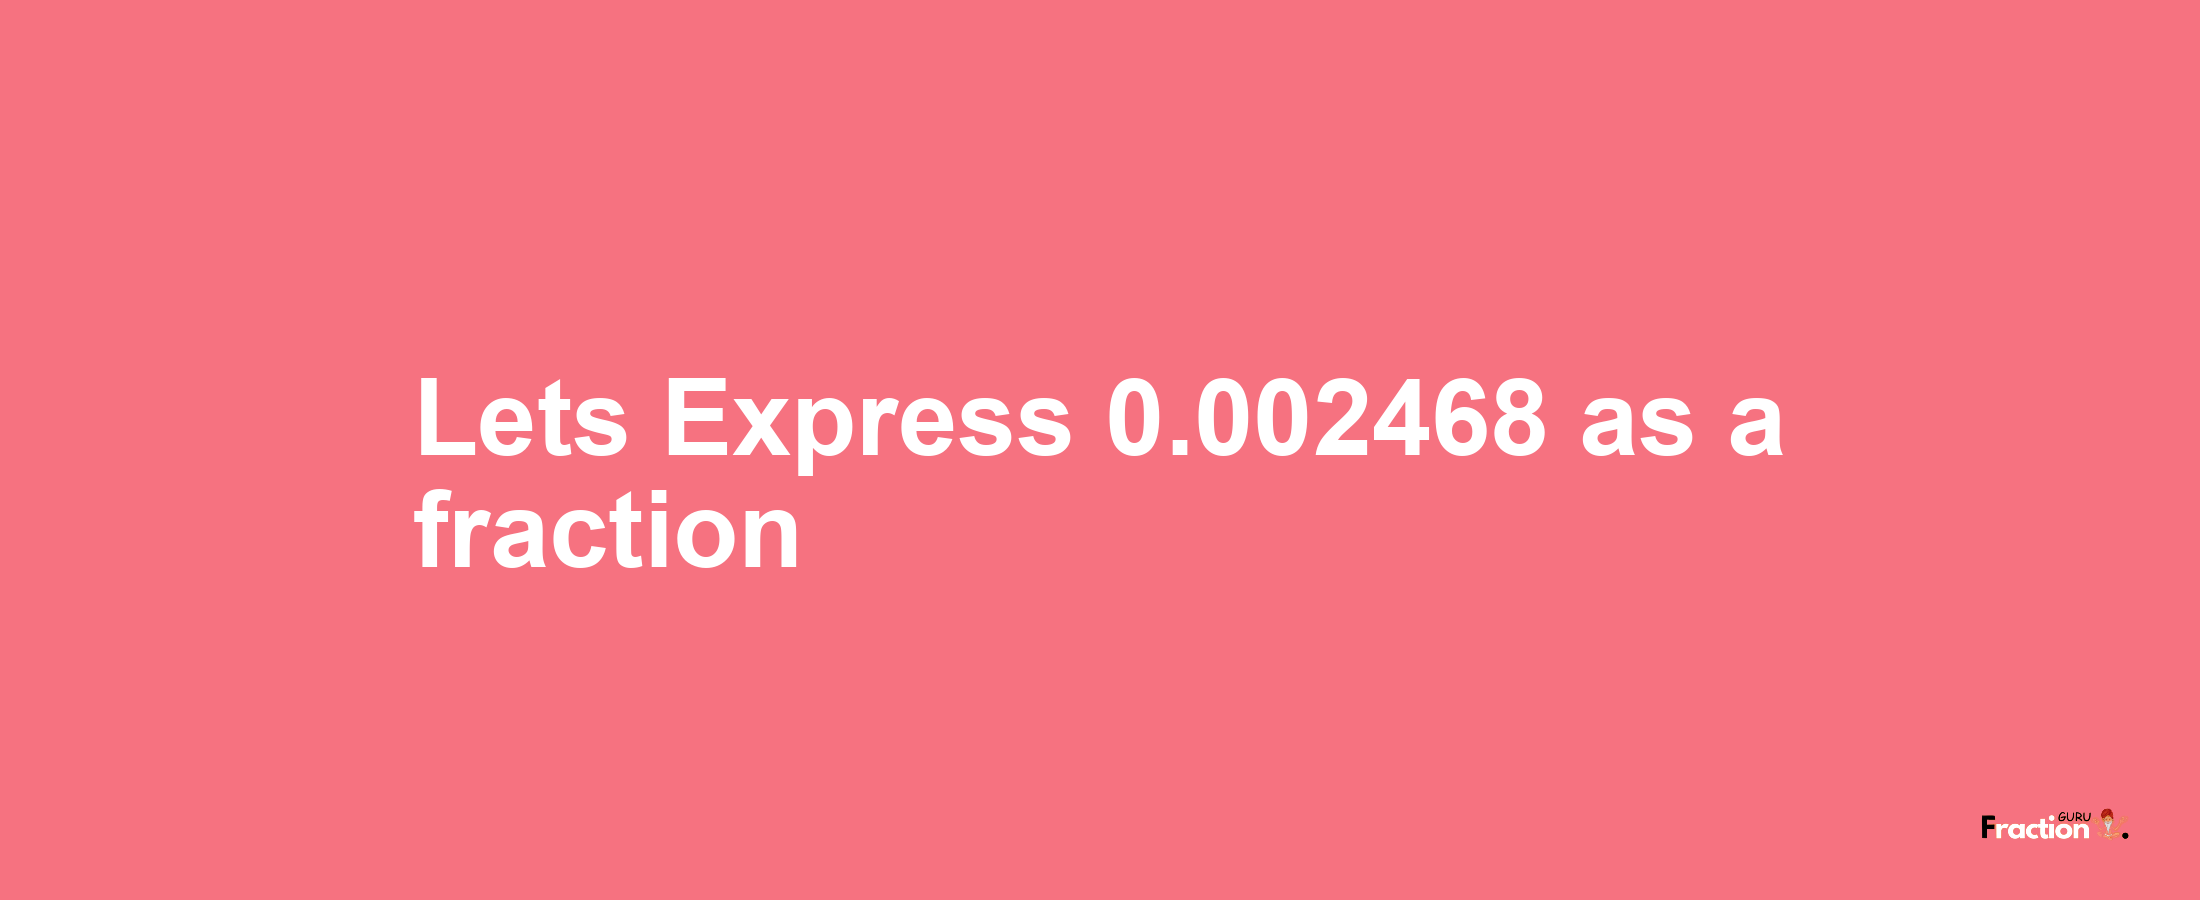 Lets Express 0.002468 as afraction